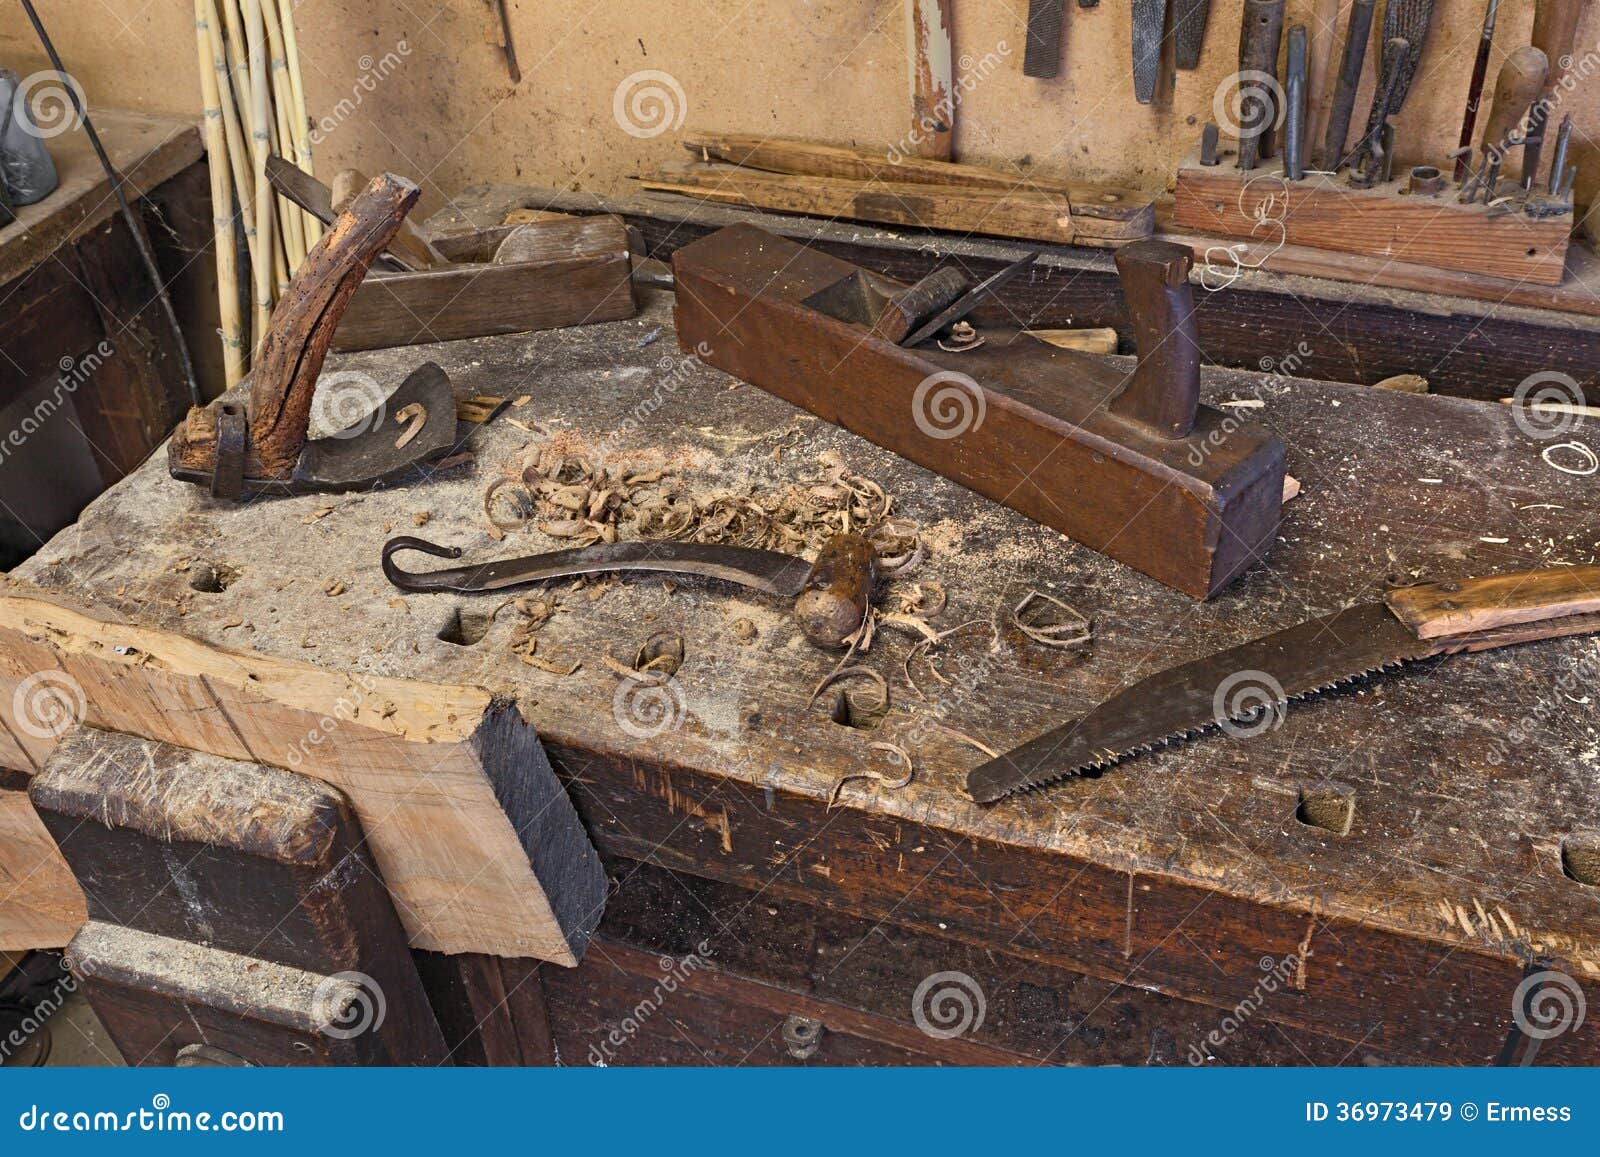 Old carpenter s bench stock image. Image of ancient 